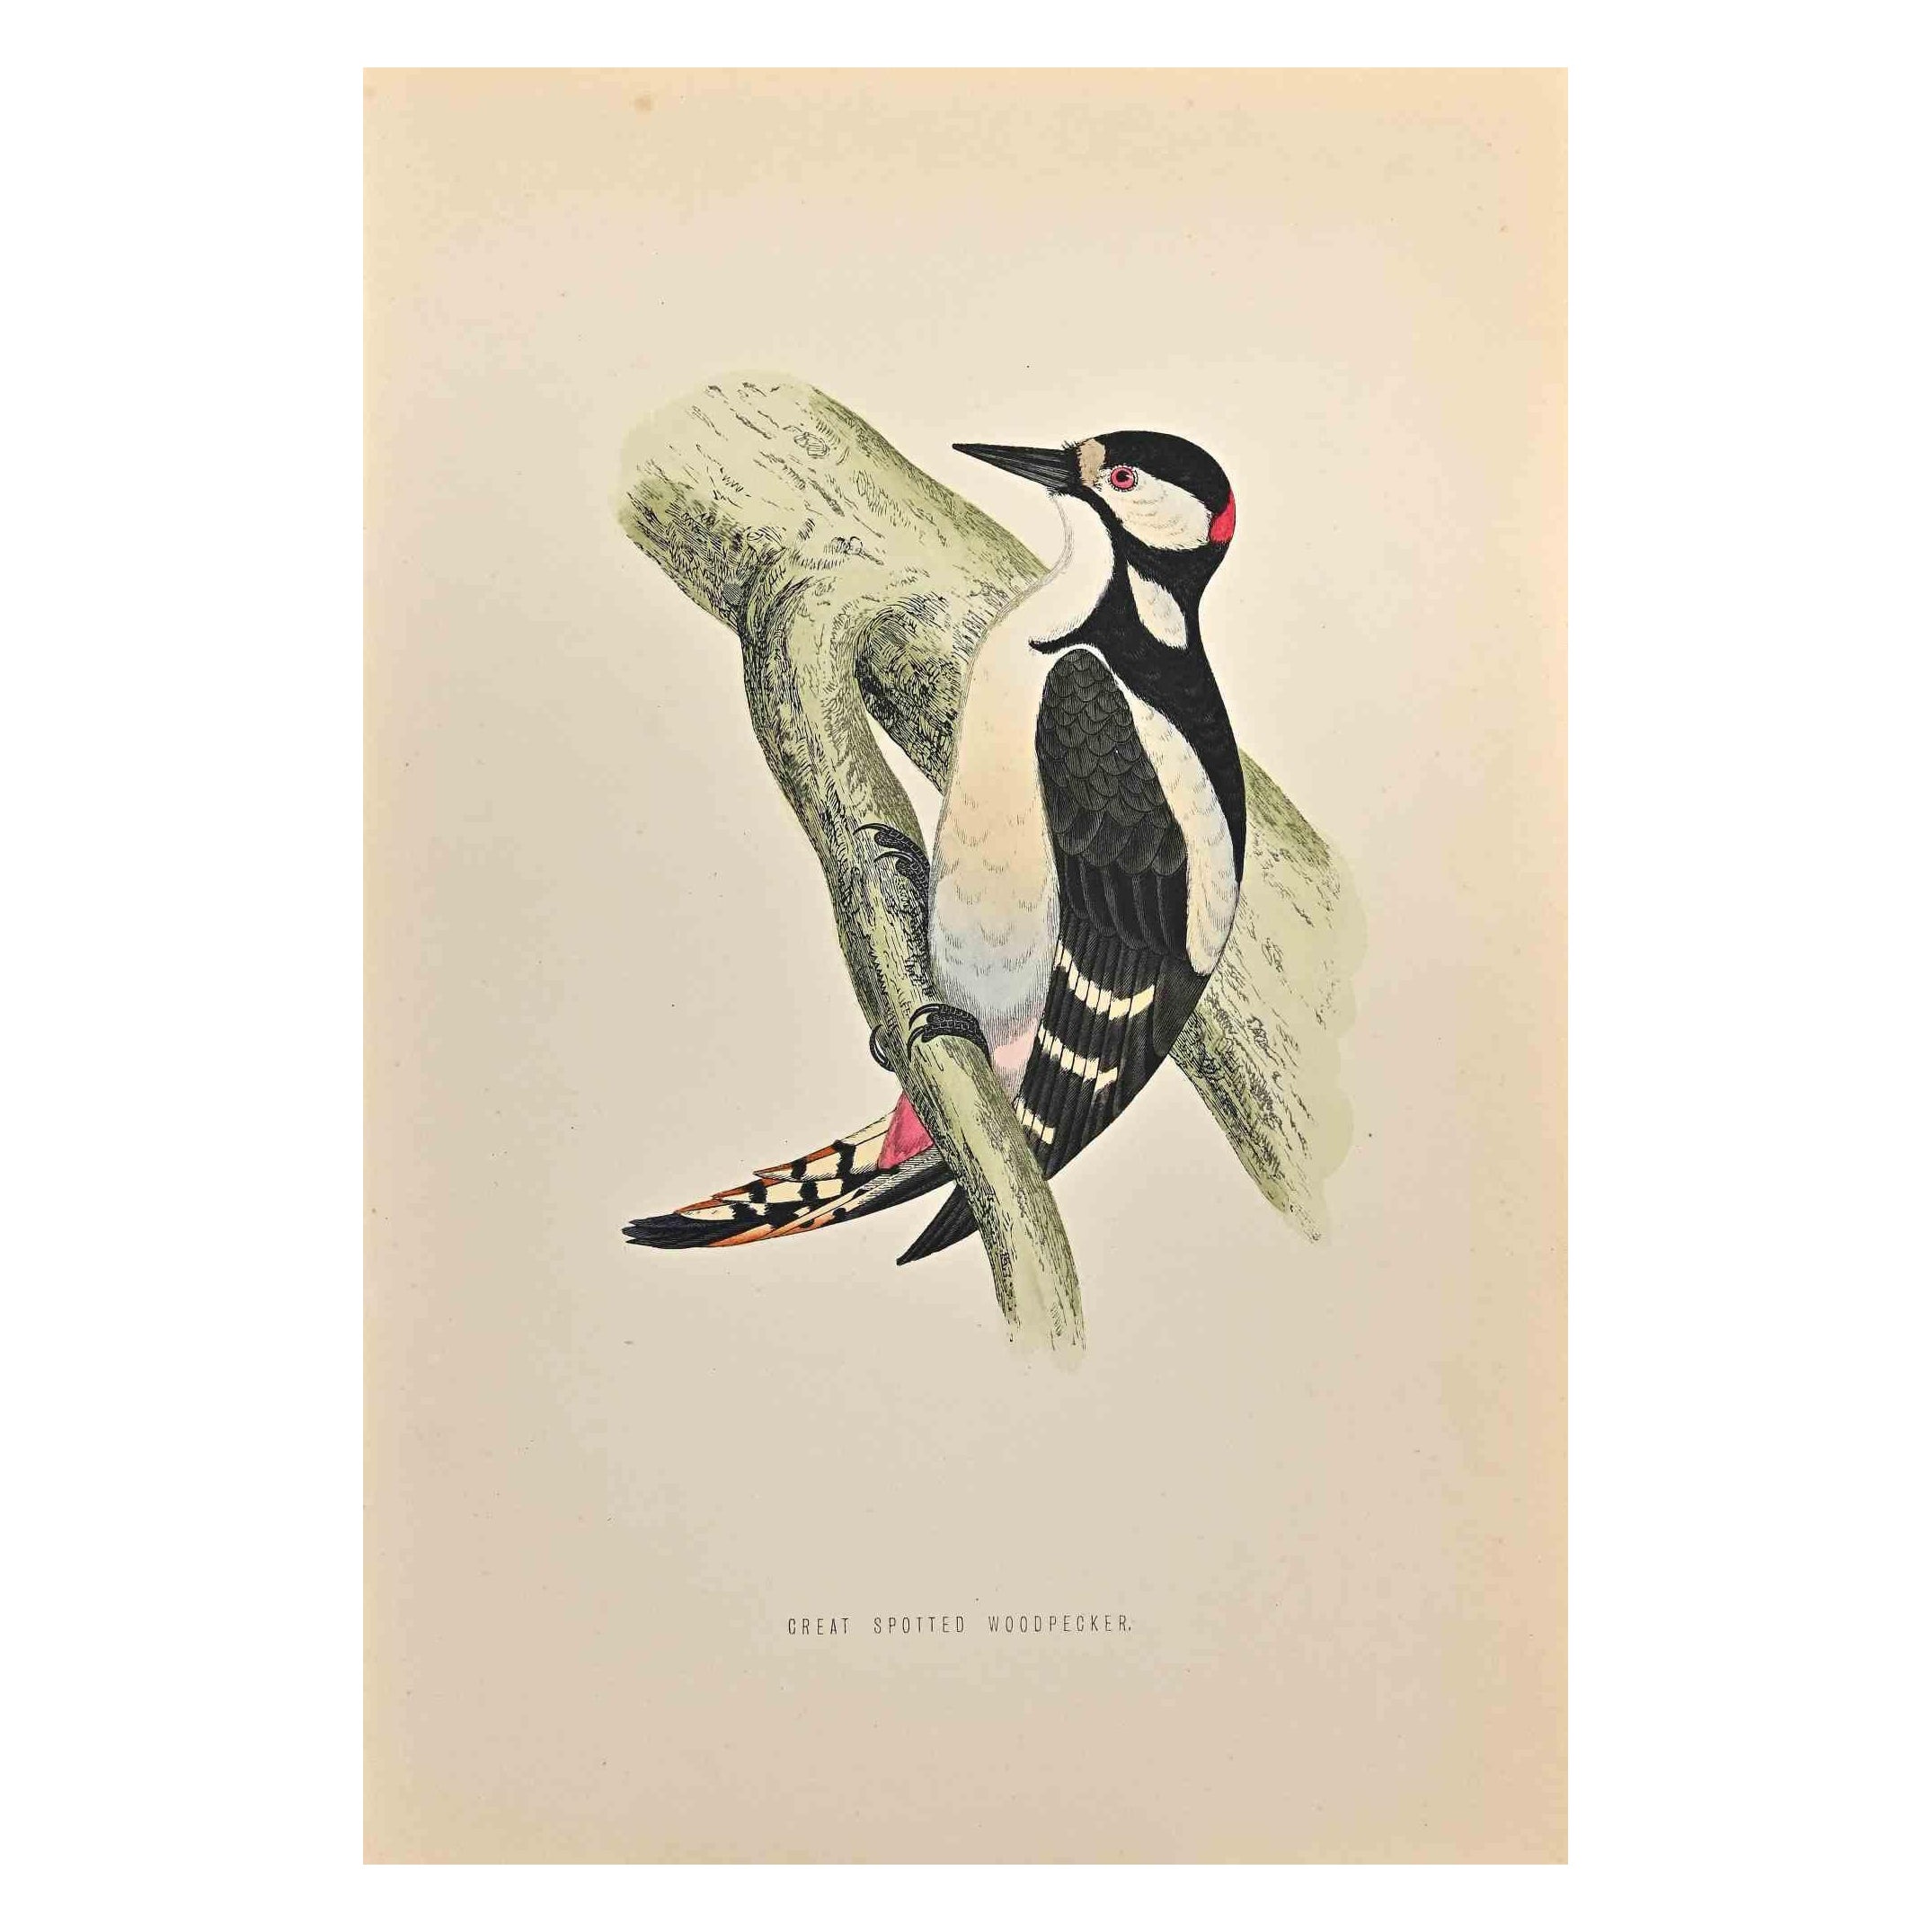 Great Spotted Wodpecker is a modern artwork realized in 1870 by the British artist Alexander Francis Lydon (1836-1917).

Woodcut print on ivory-colored paper.

Hand-colored, published by London, Bell & Sons, 1870.  

The name of the bird is printed